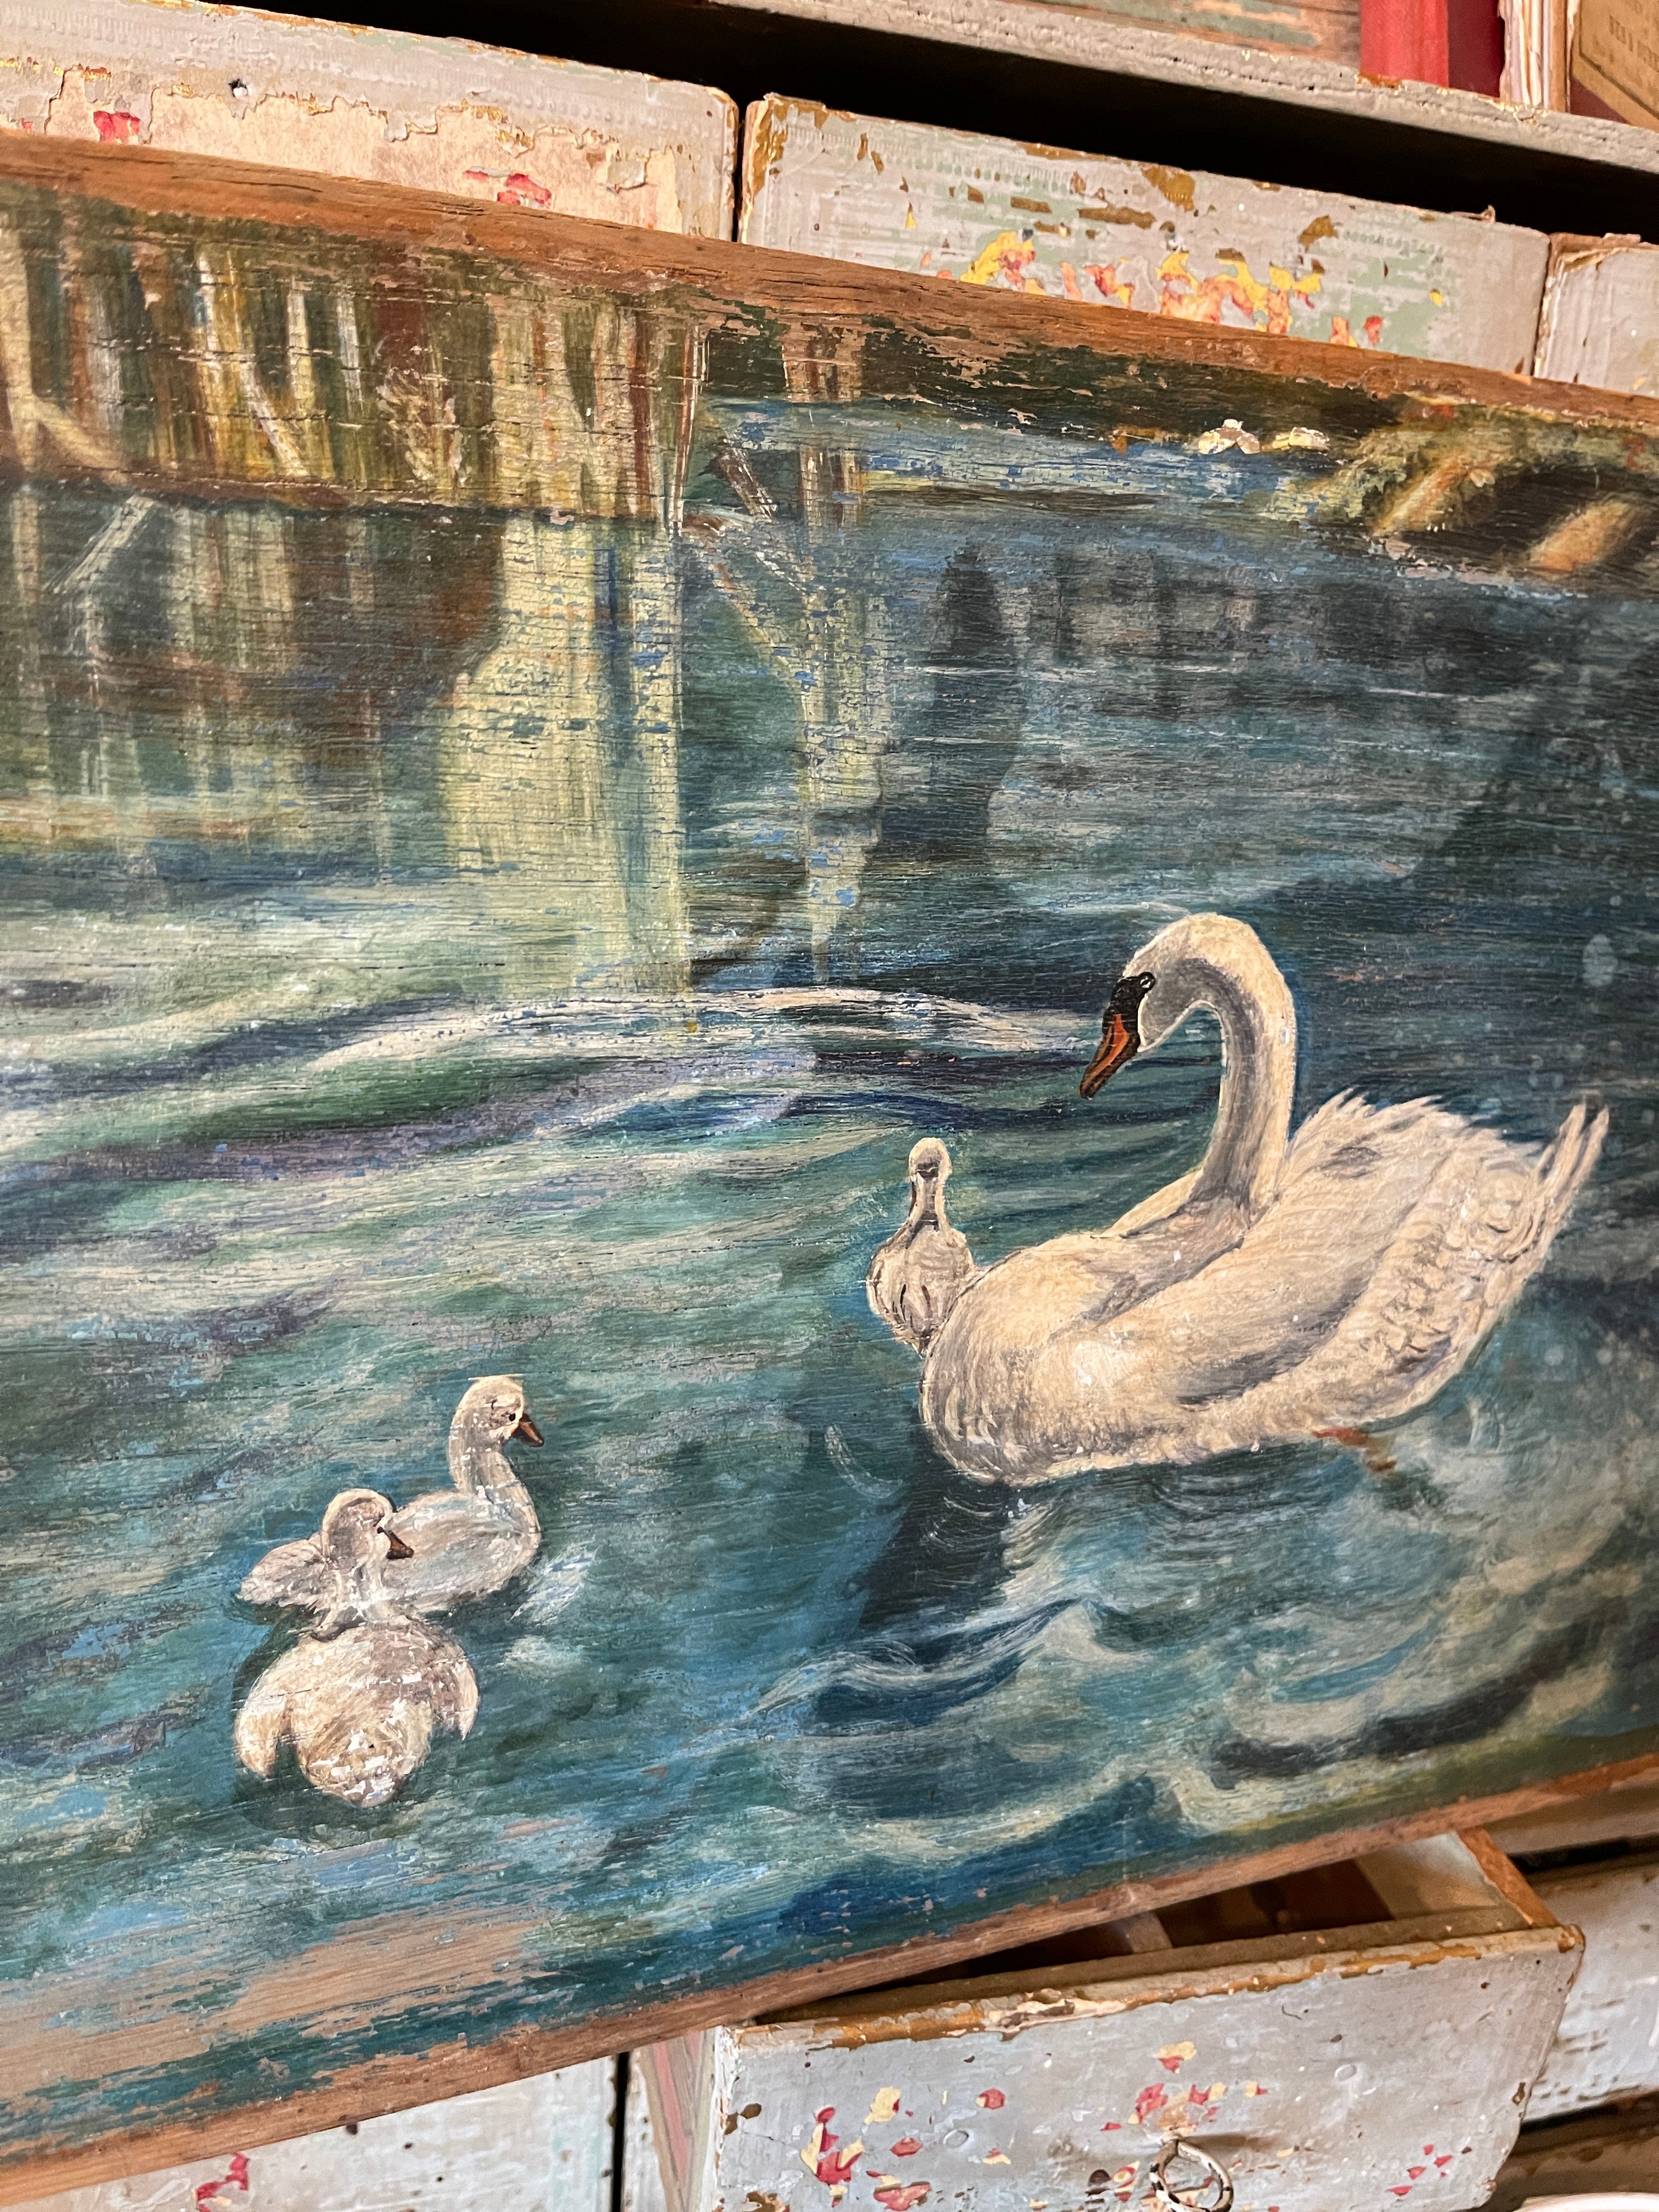 Original Antique French "Swan Lake" Oil Painting